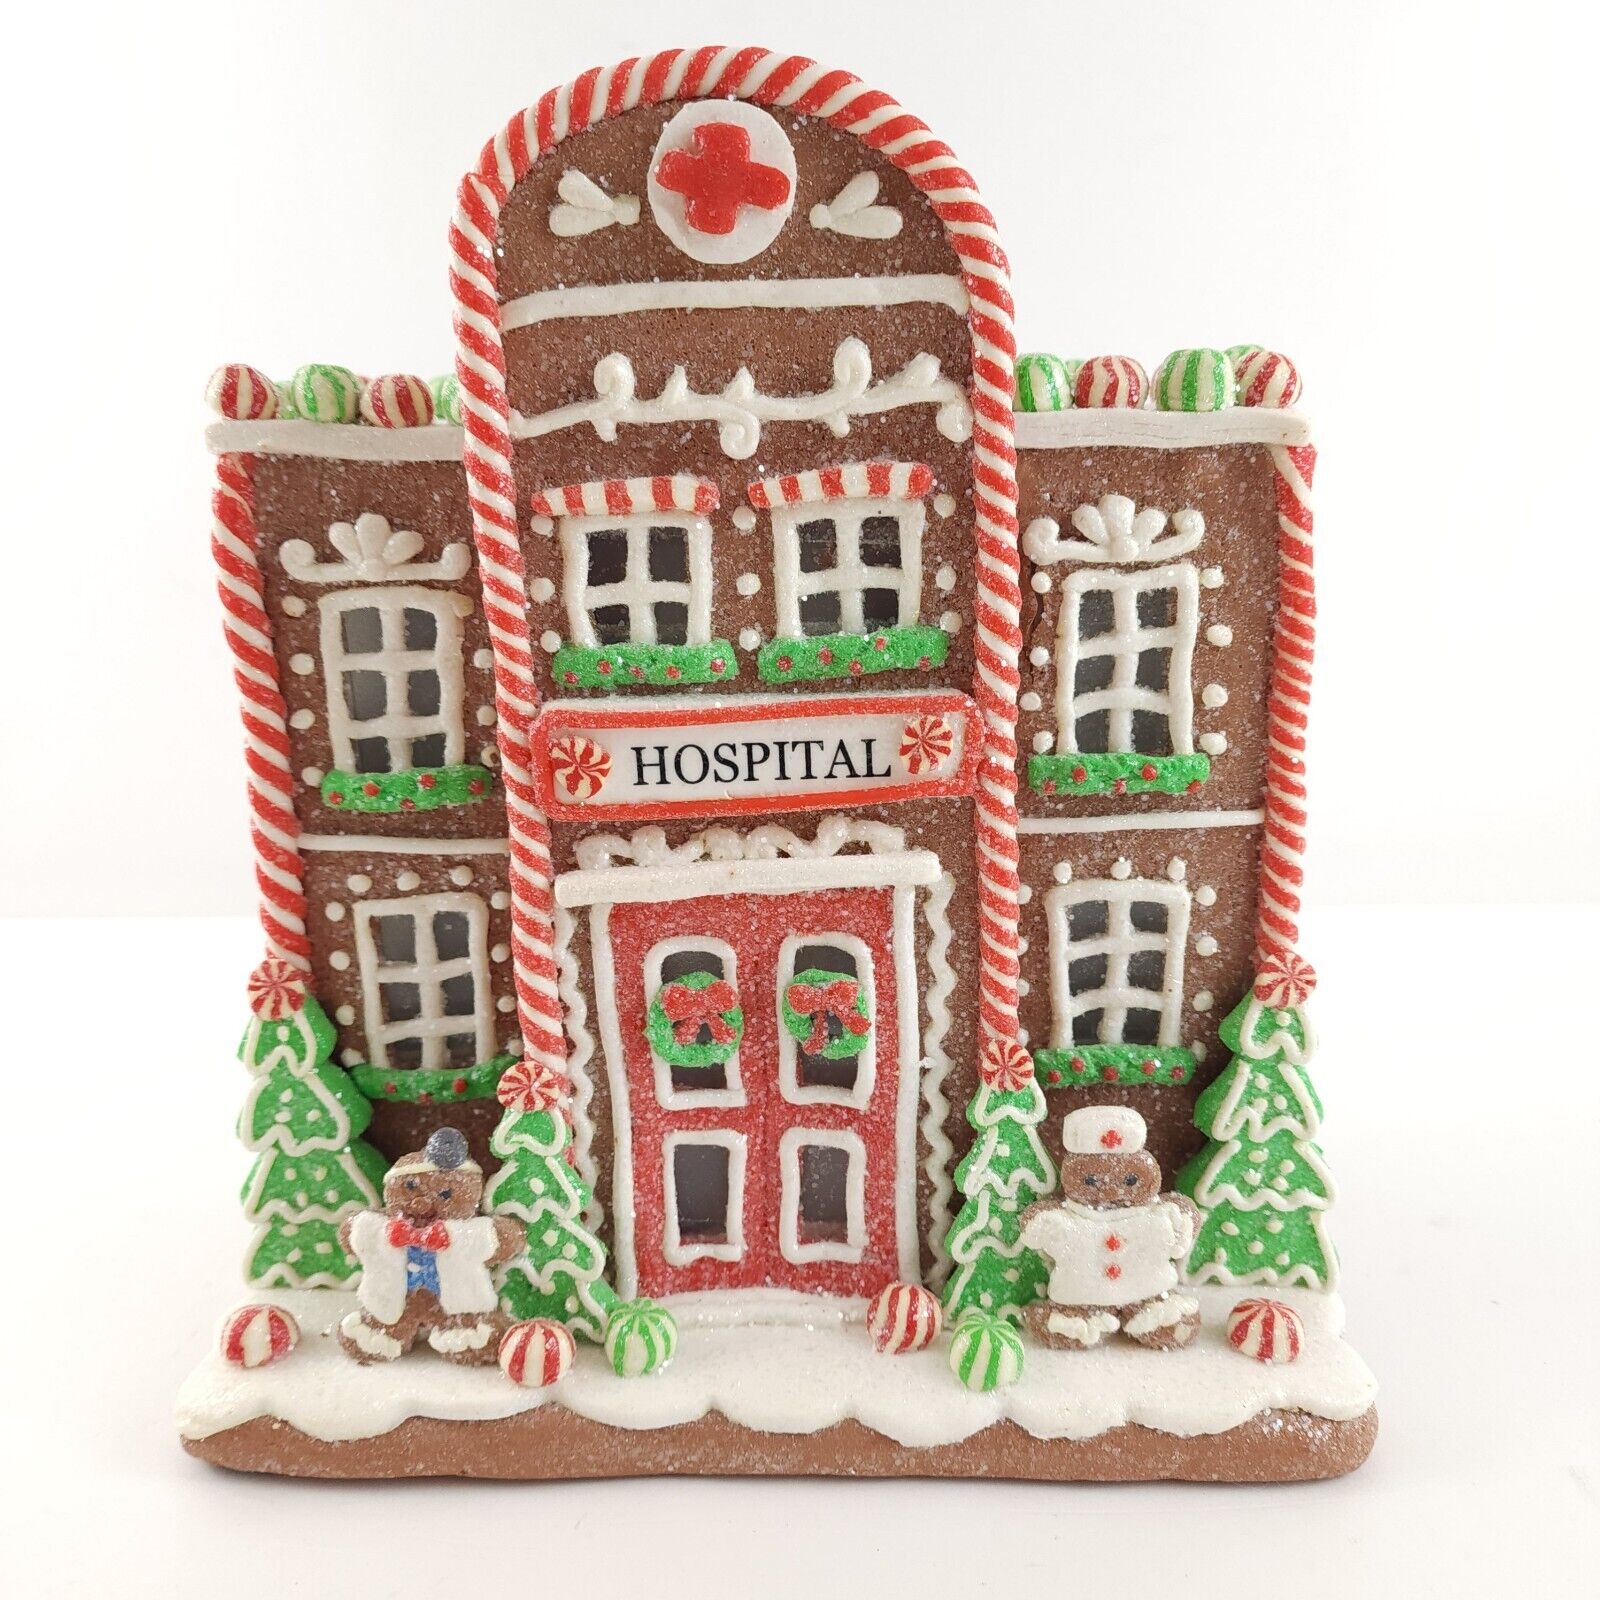 Illuminated Townsquare Gingerbread Hospital by Valerie